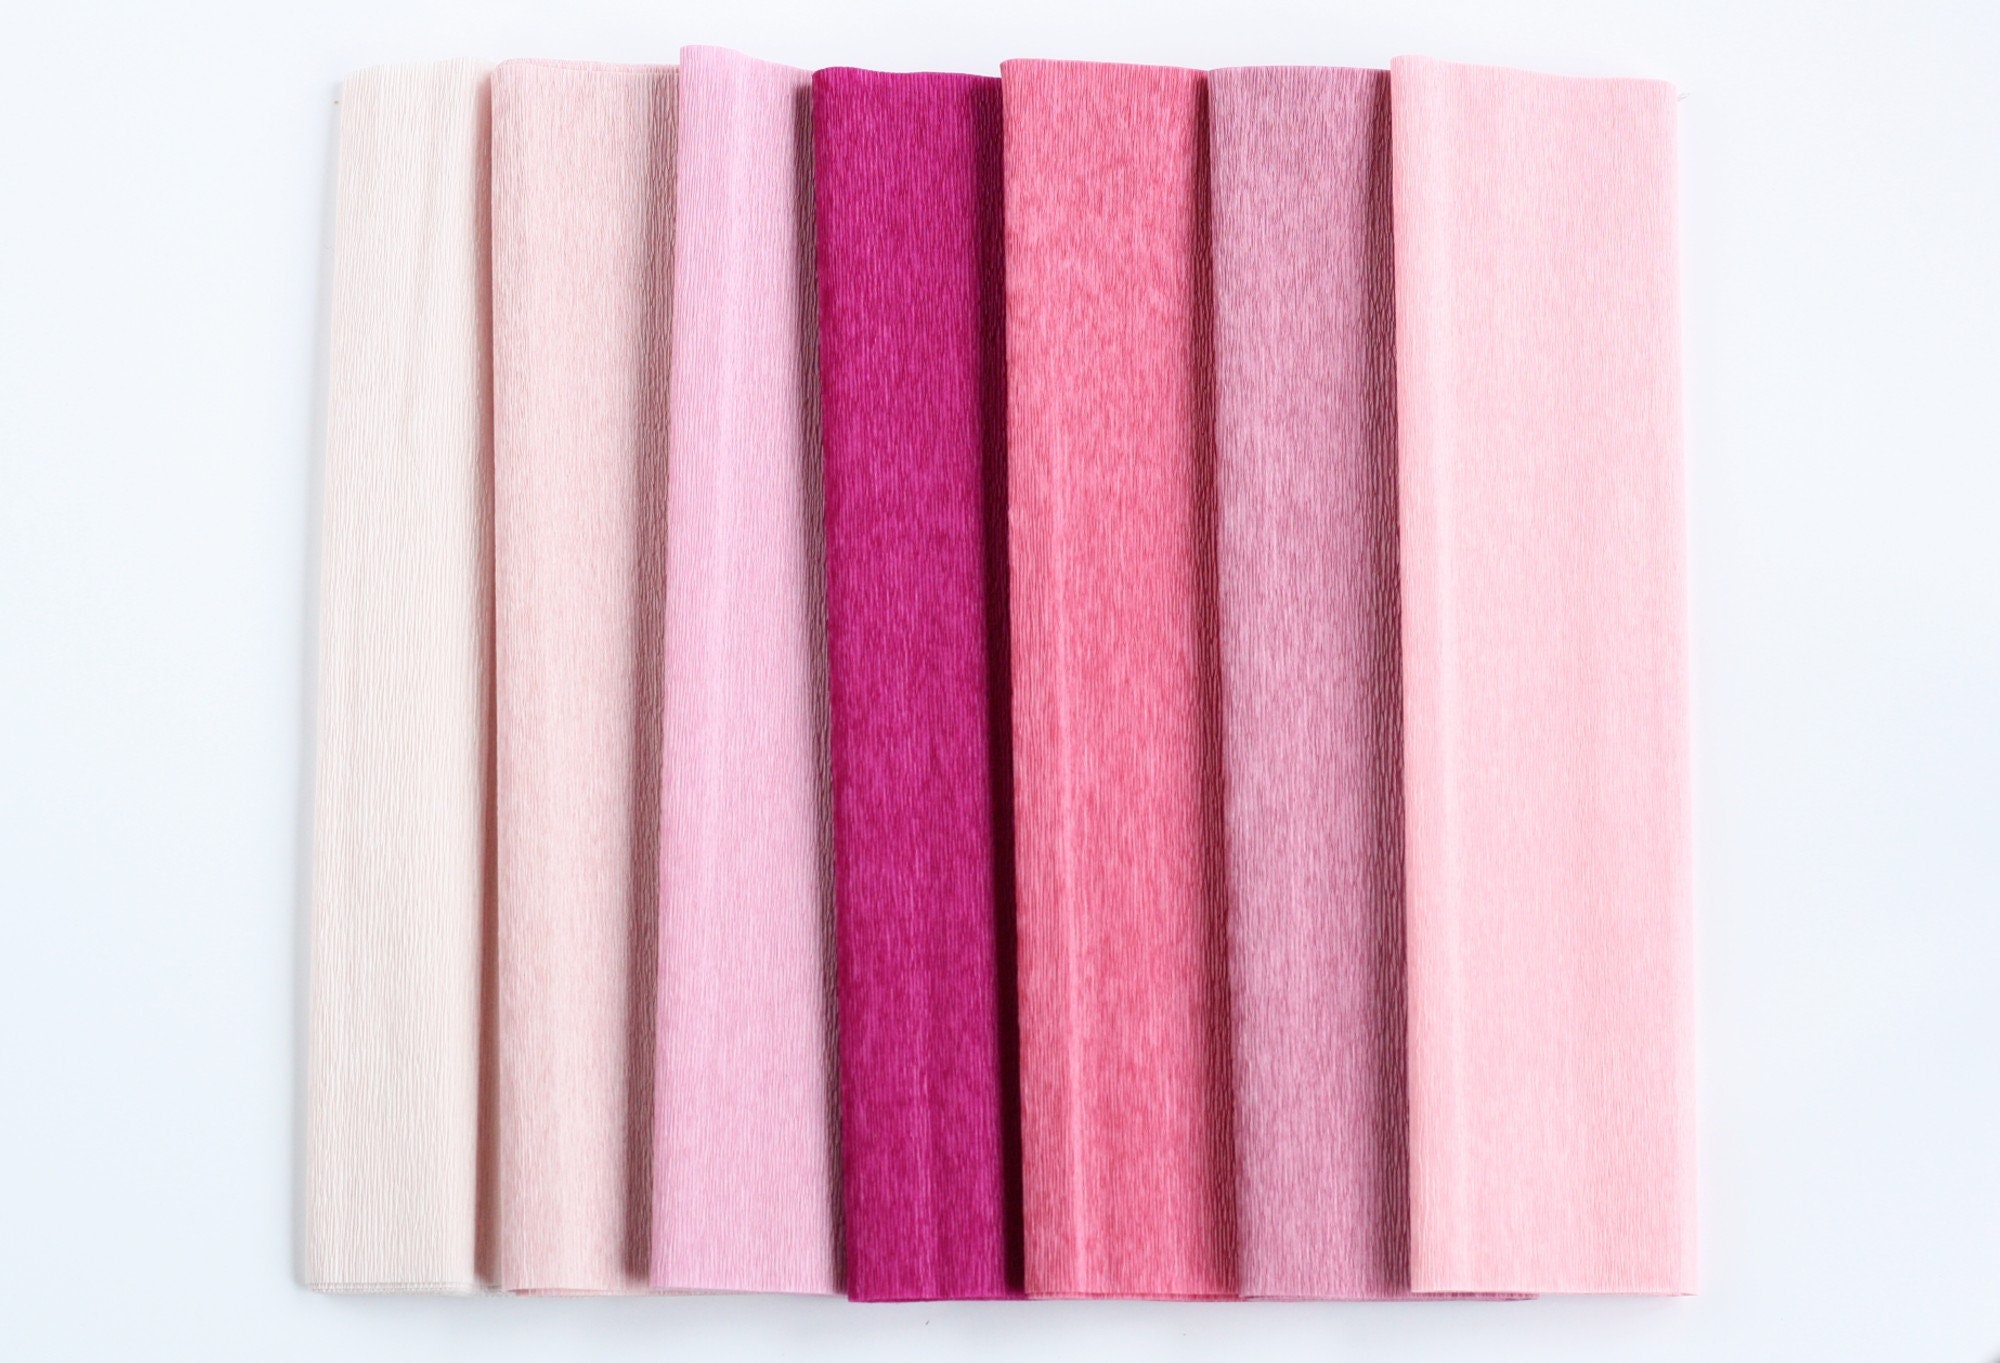 90g 7 Roll Sample Pack of Pink - Crepe Paper by Cartotecnica Rossi